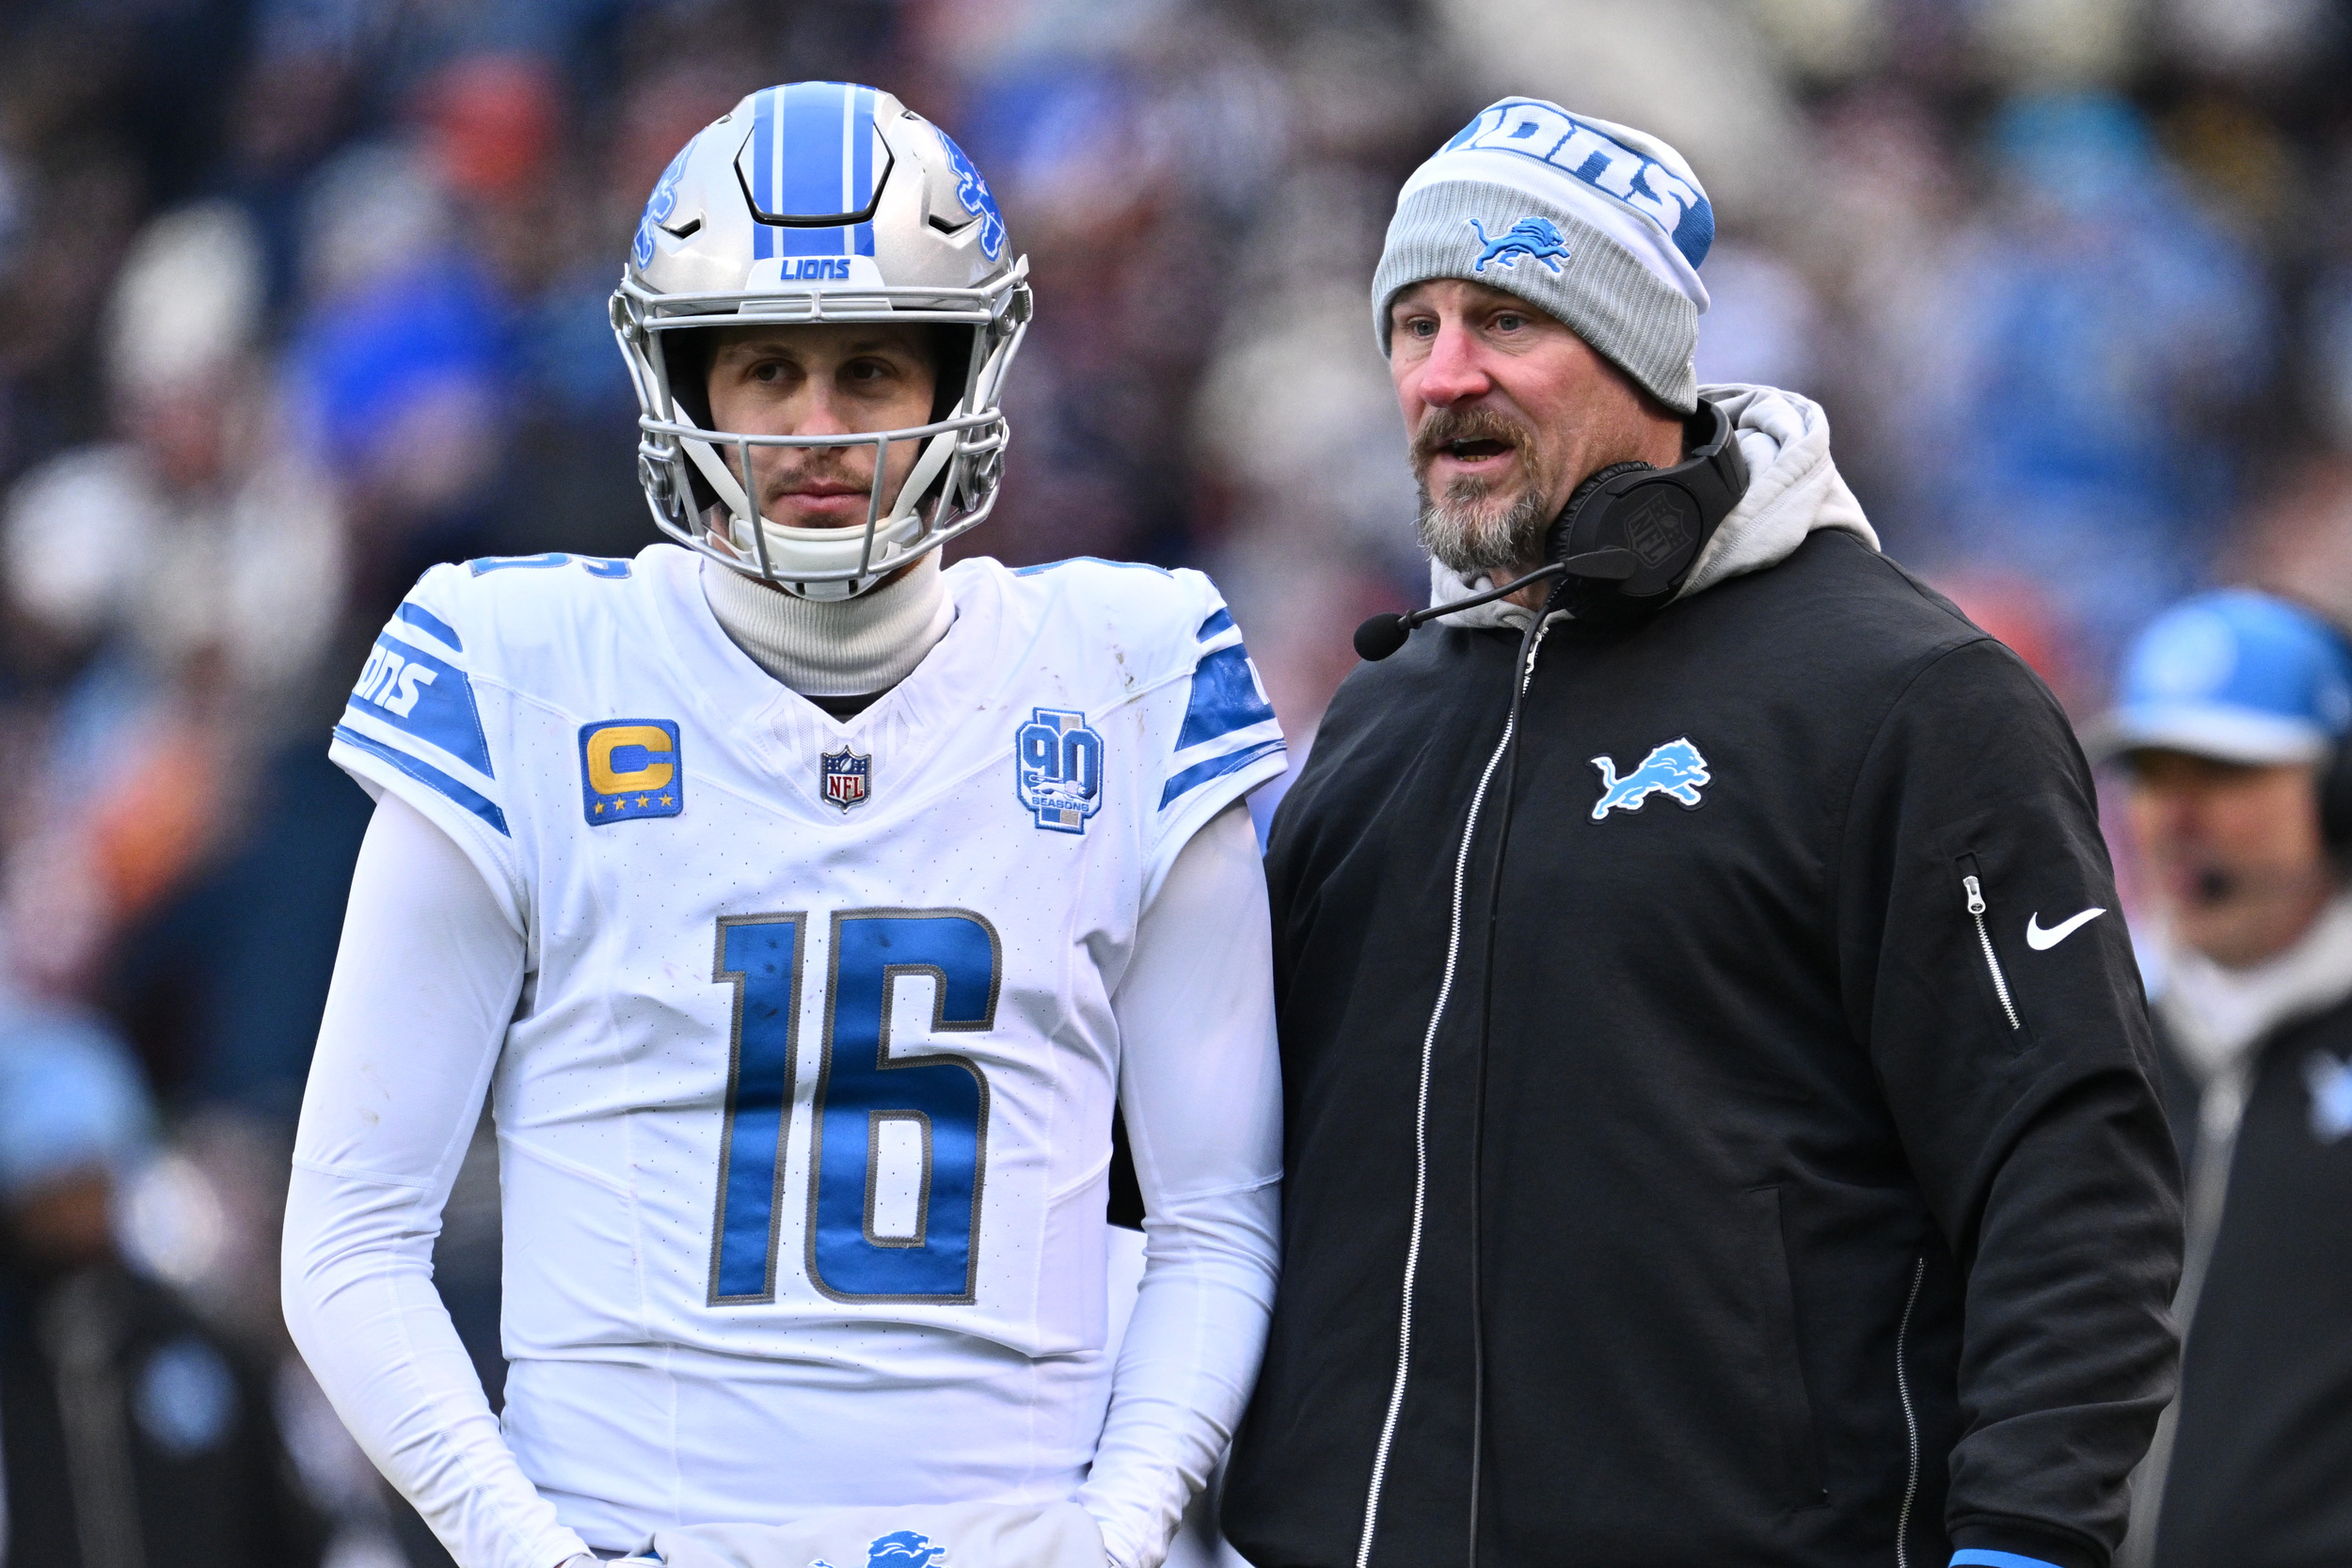 nfc title game prediction: why lions will advance to super bowl